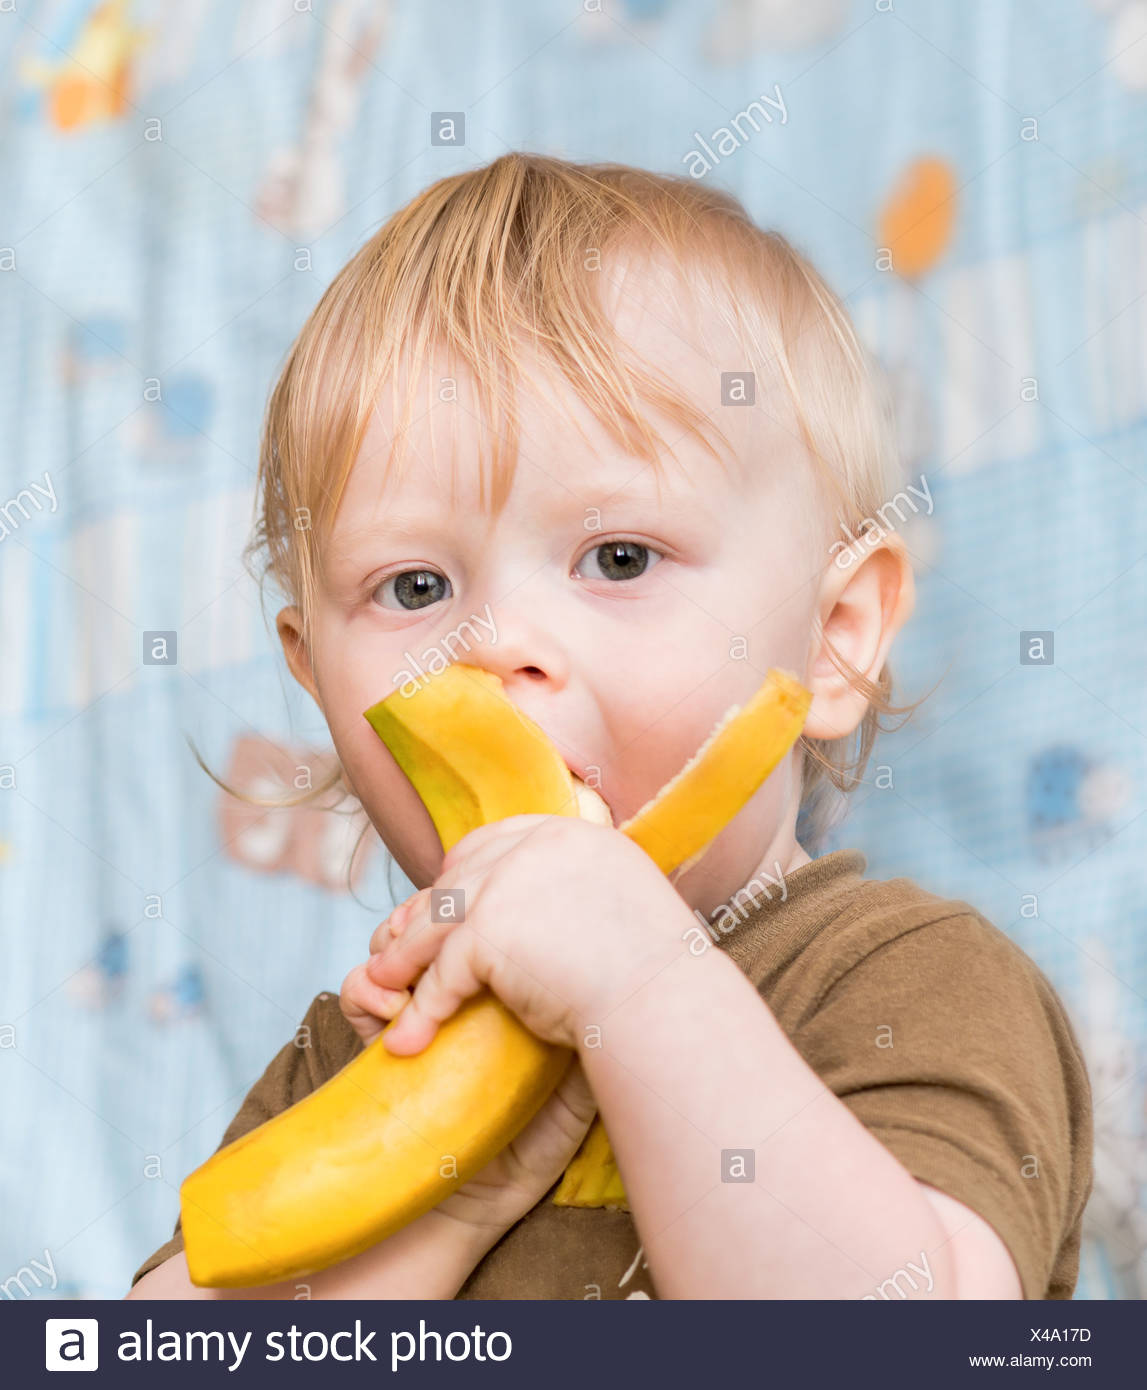 Little Girl Eat Banana High Resolution Stock Photography and Images - Alamy